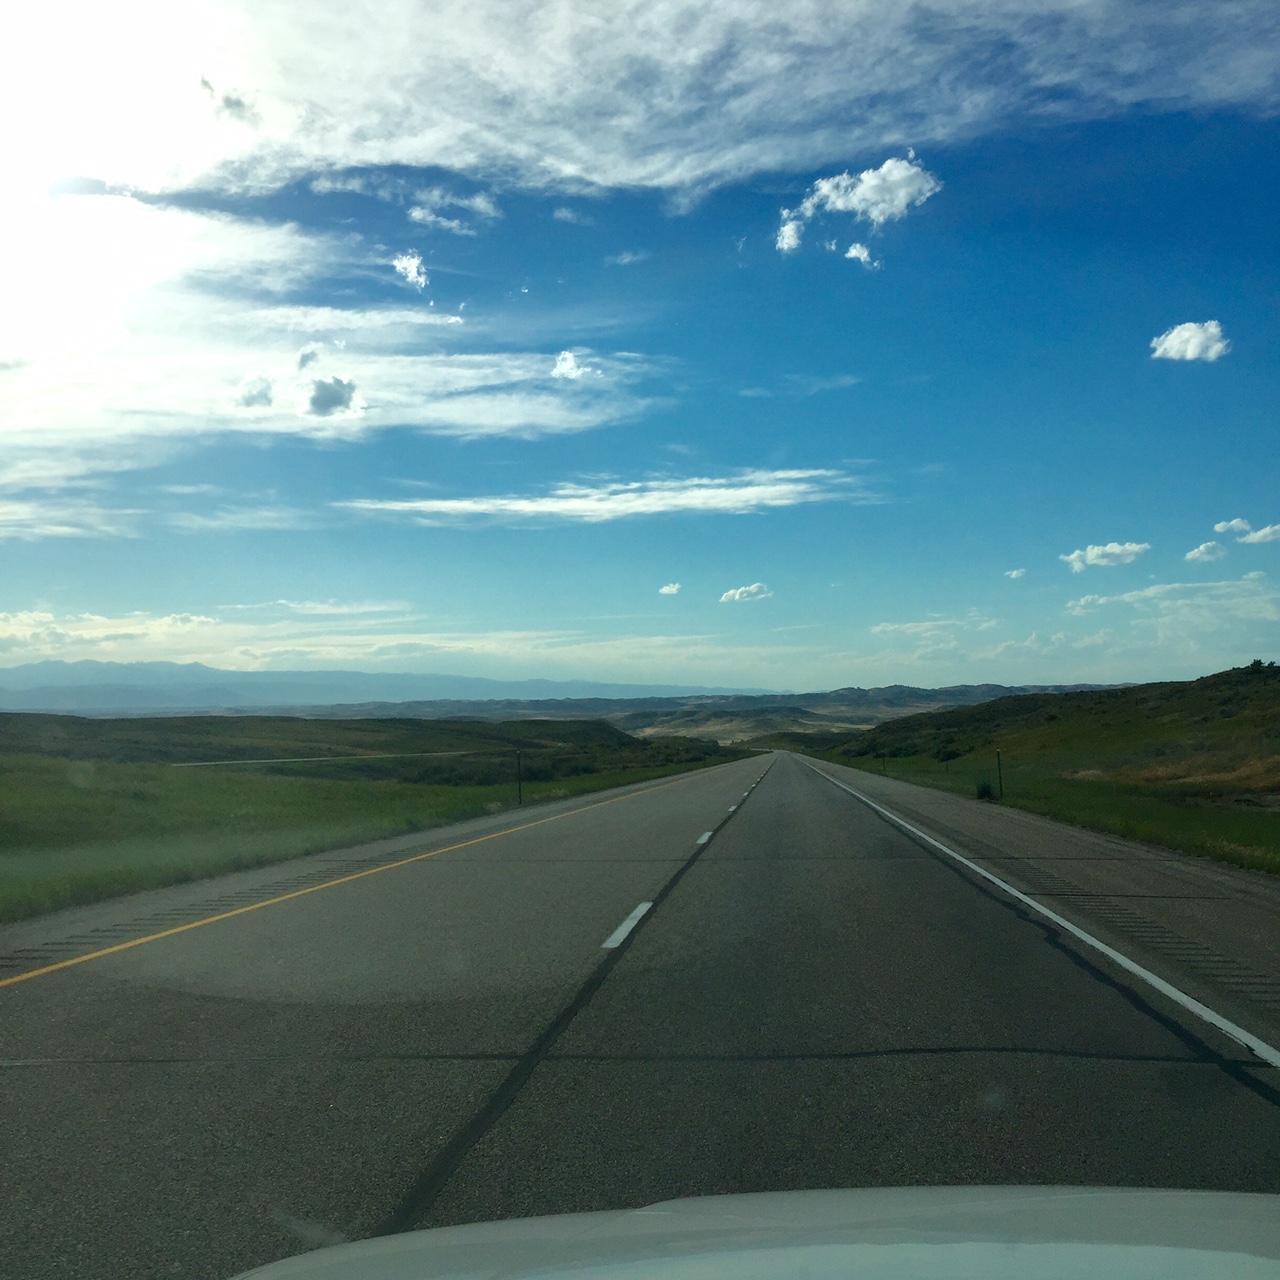 The Buffalo WY exit is now less than a mile away. It was a beautiful evening to stop.